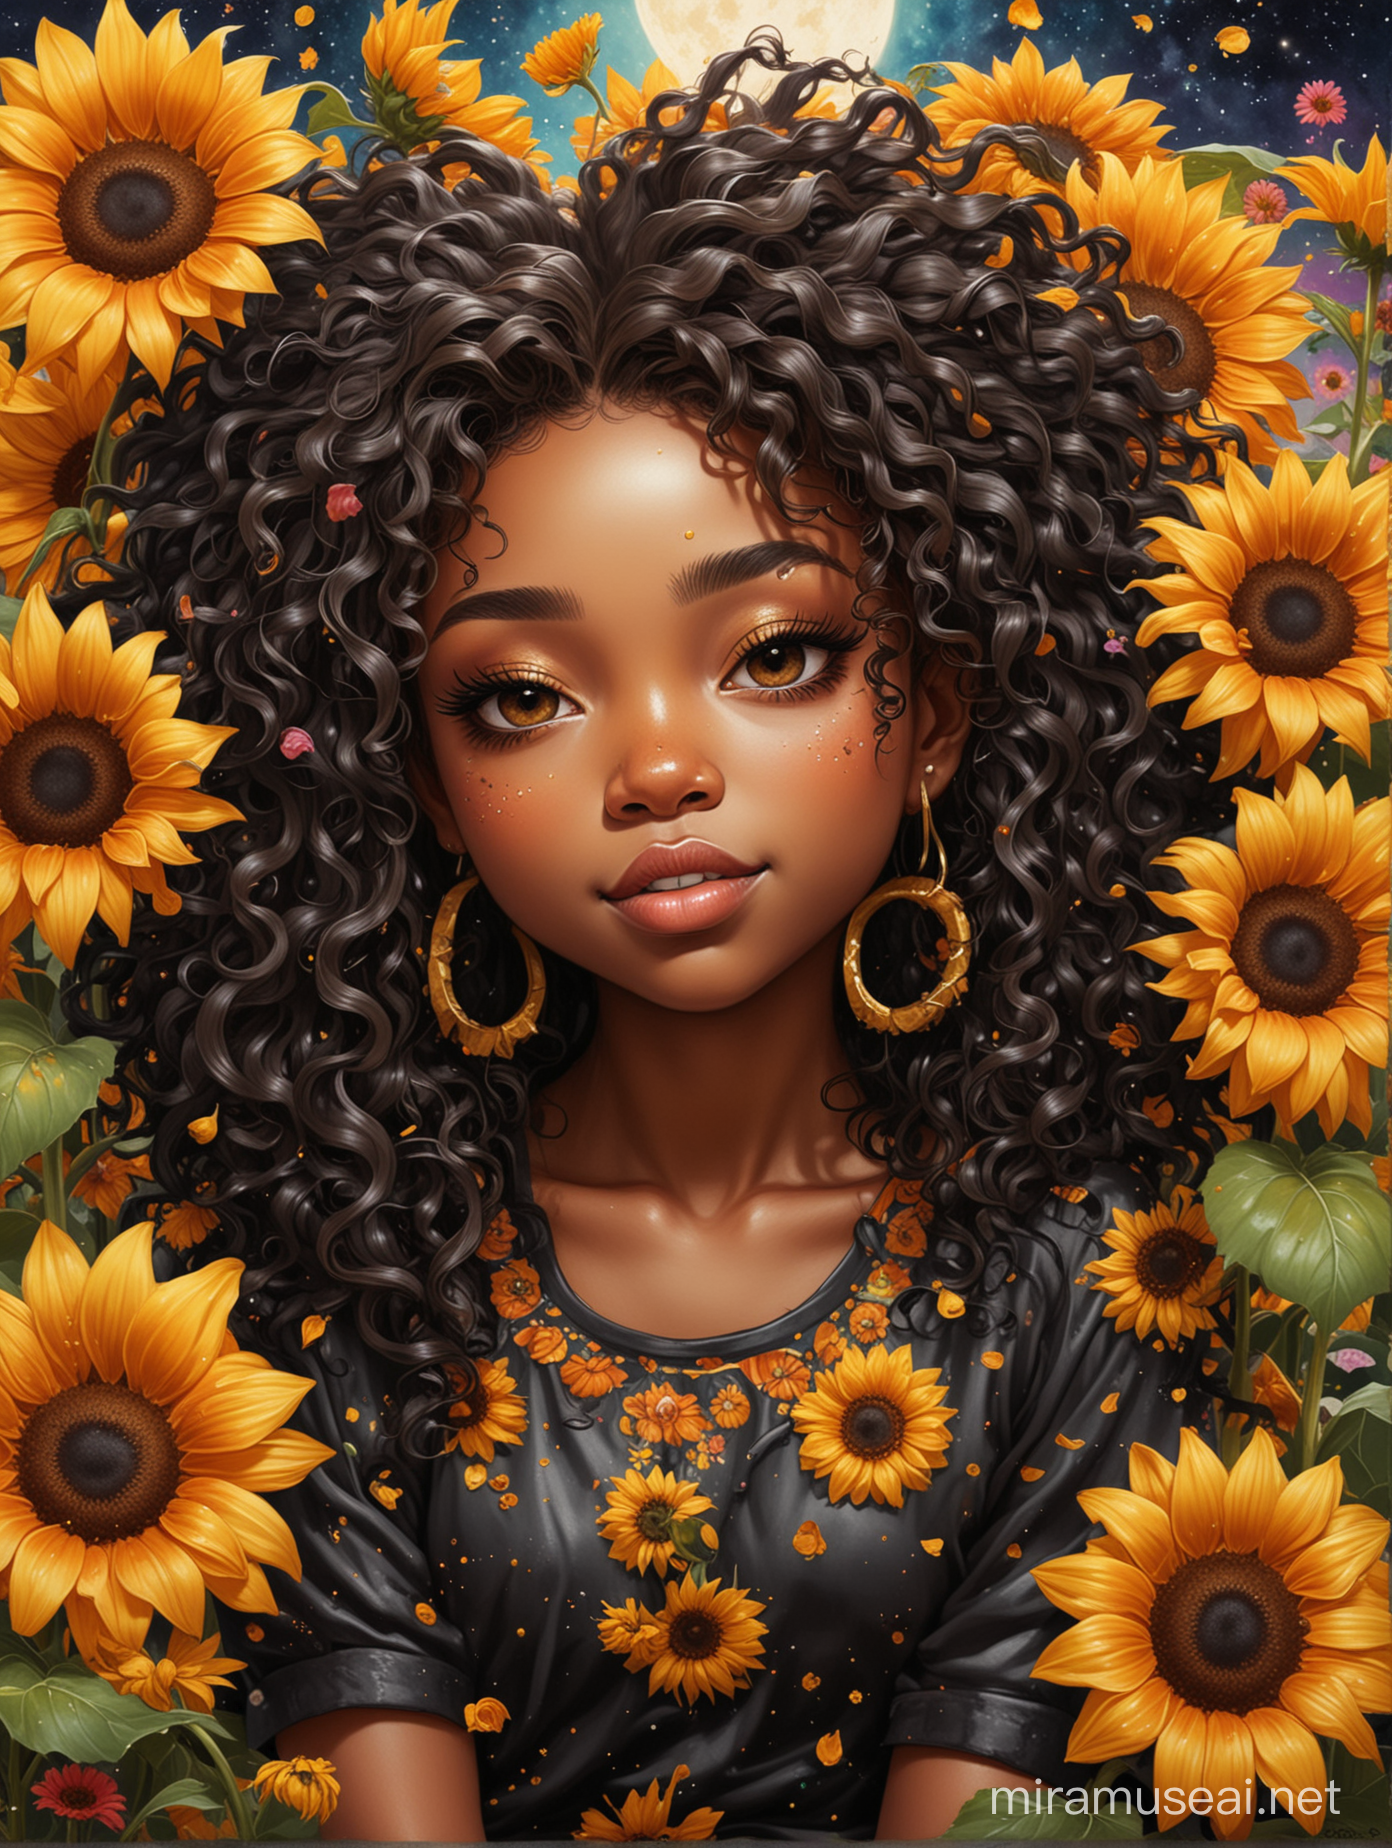 A sassy thick-lined oil painting cartoon black chibi girl lounging lazily on her side, surrounded by colorful flower petals. She is in the middle of the astrological Leo symbol with Prominent makeup. Highly detailed tightly curly black afro. Background of large yellow sunflowers surrounding her . Looking up coyly, she grins widely, showing sharp lion teeth. Her poofy hair forms a mane framing her confident, regal expression.